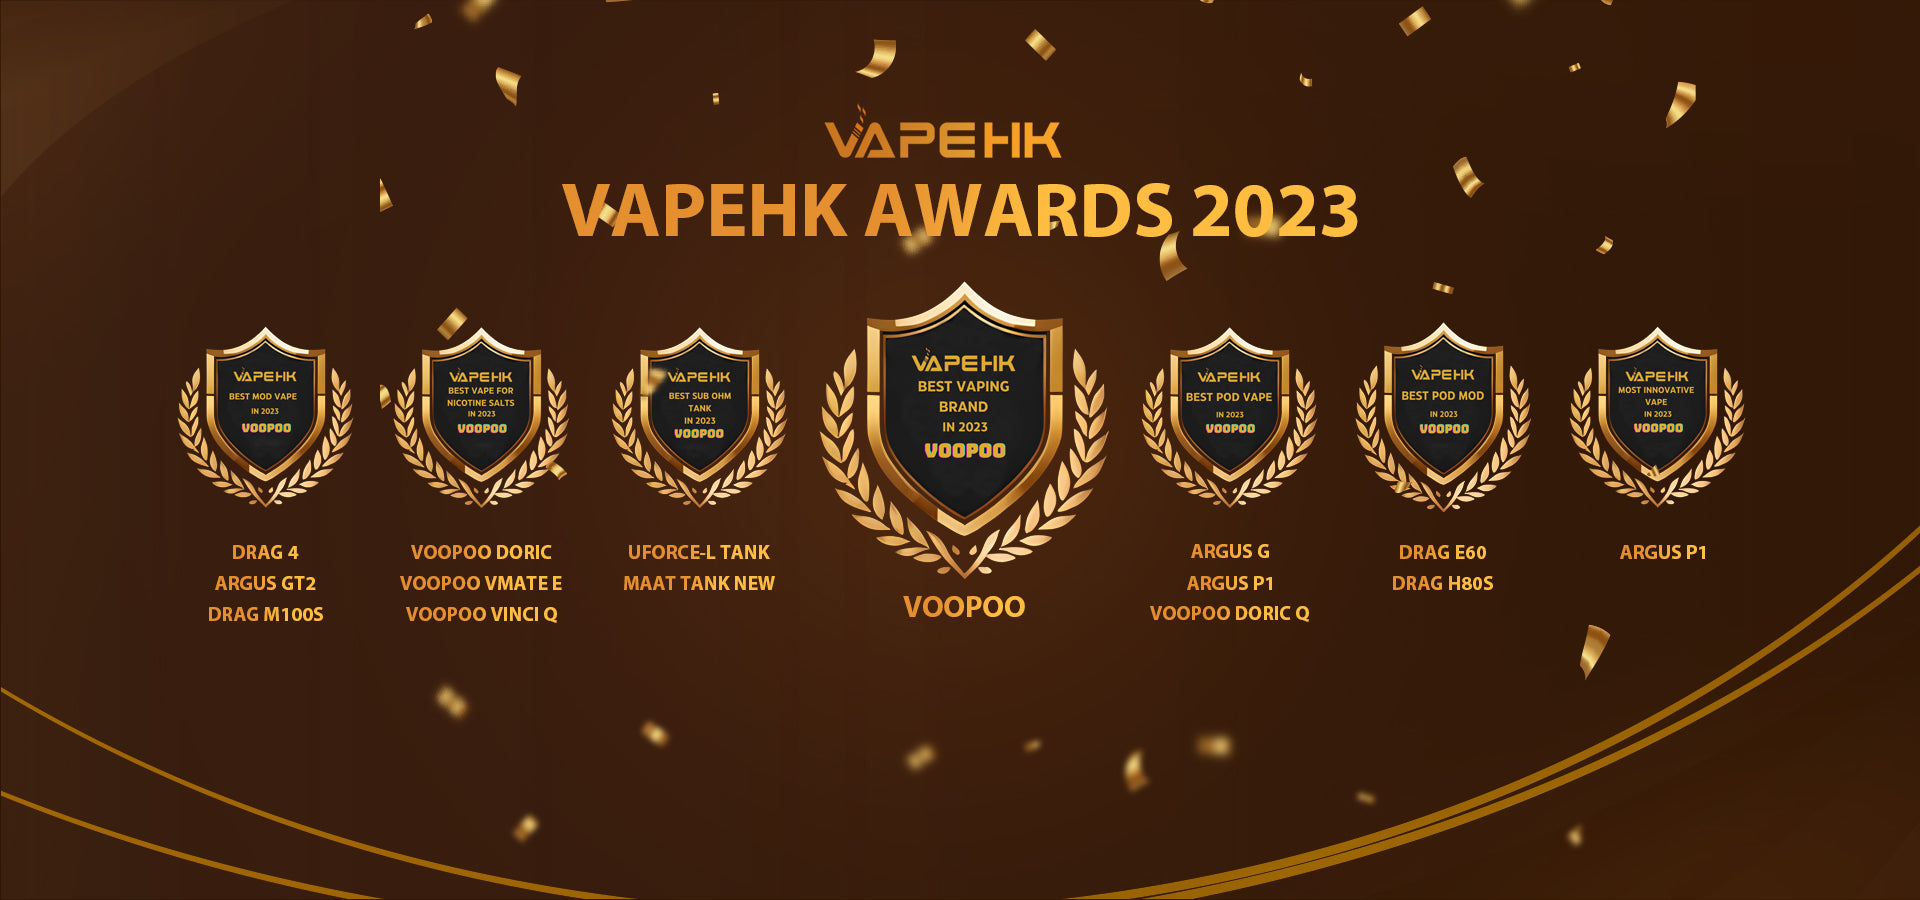 VOOPOO Won 17 Annual Awards Honored by VapeHK